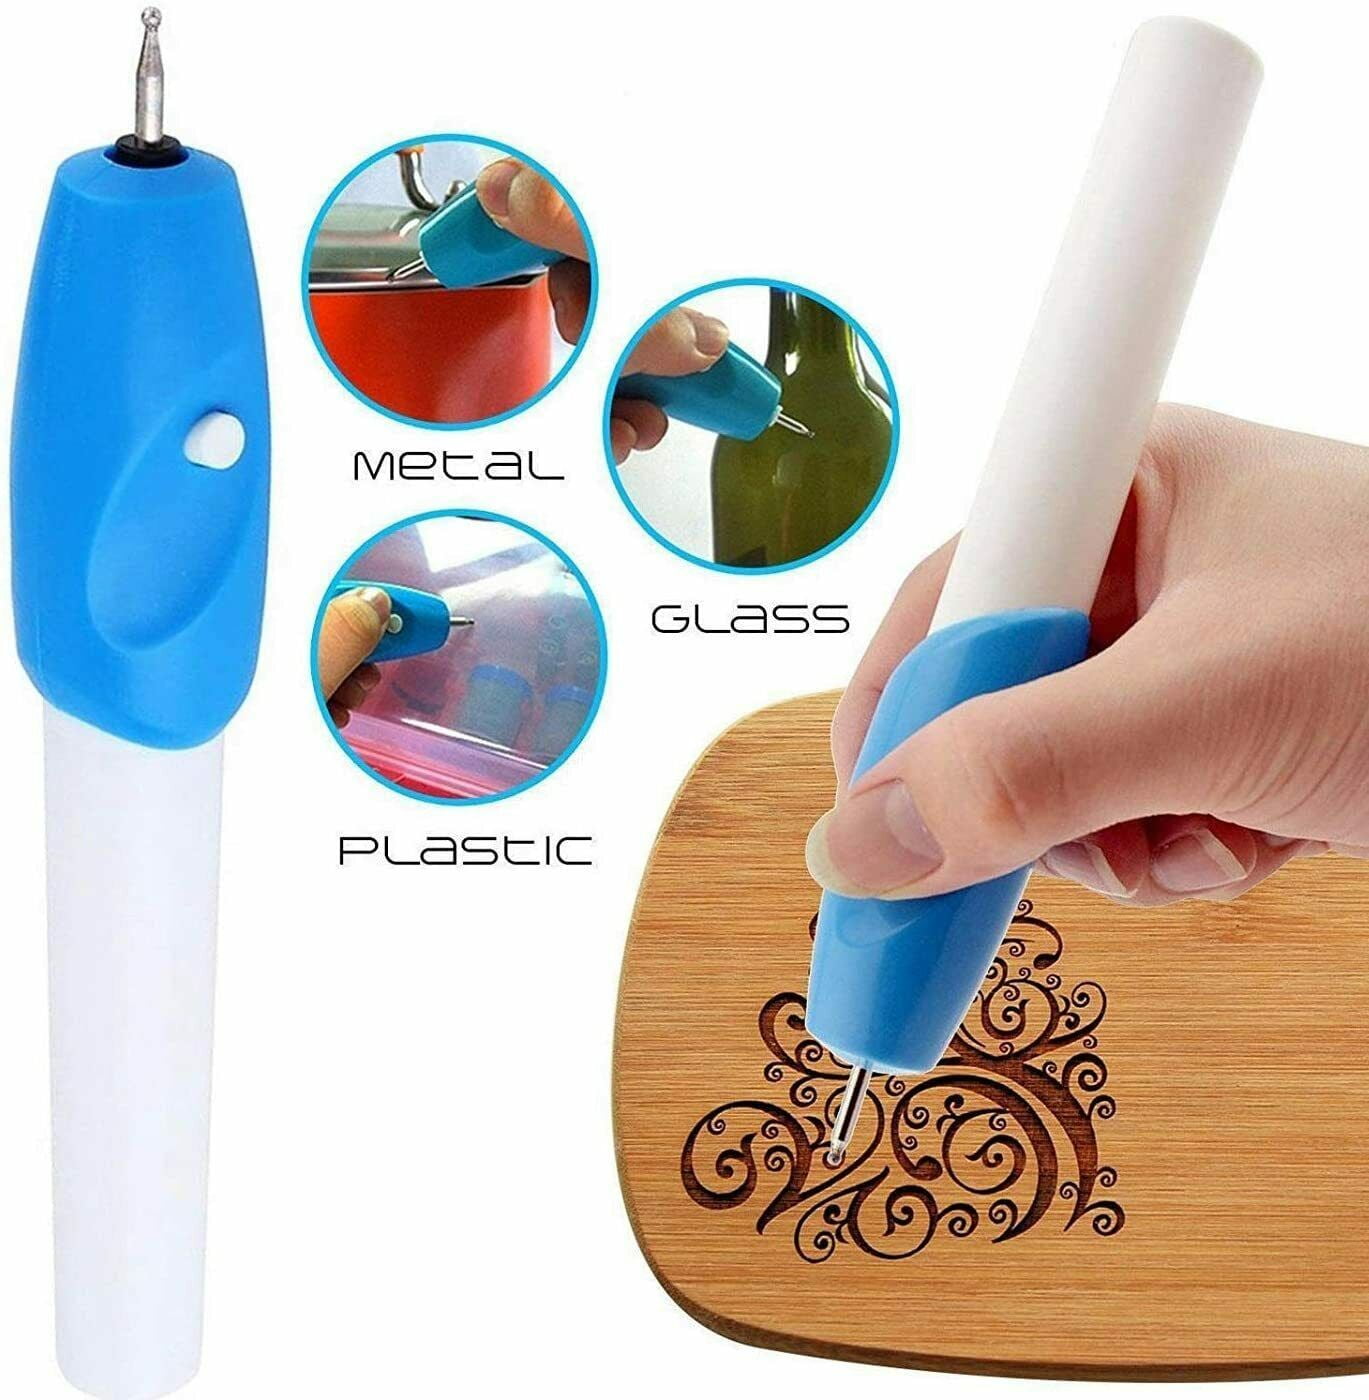 Cordless Engraving Engraver Pen - Perfect for Metal Wood Ceramic Glass -  Accessory Tool for Crafting - Label Tools Jewelry and Valuables 